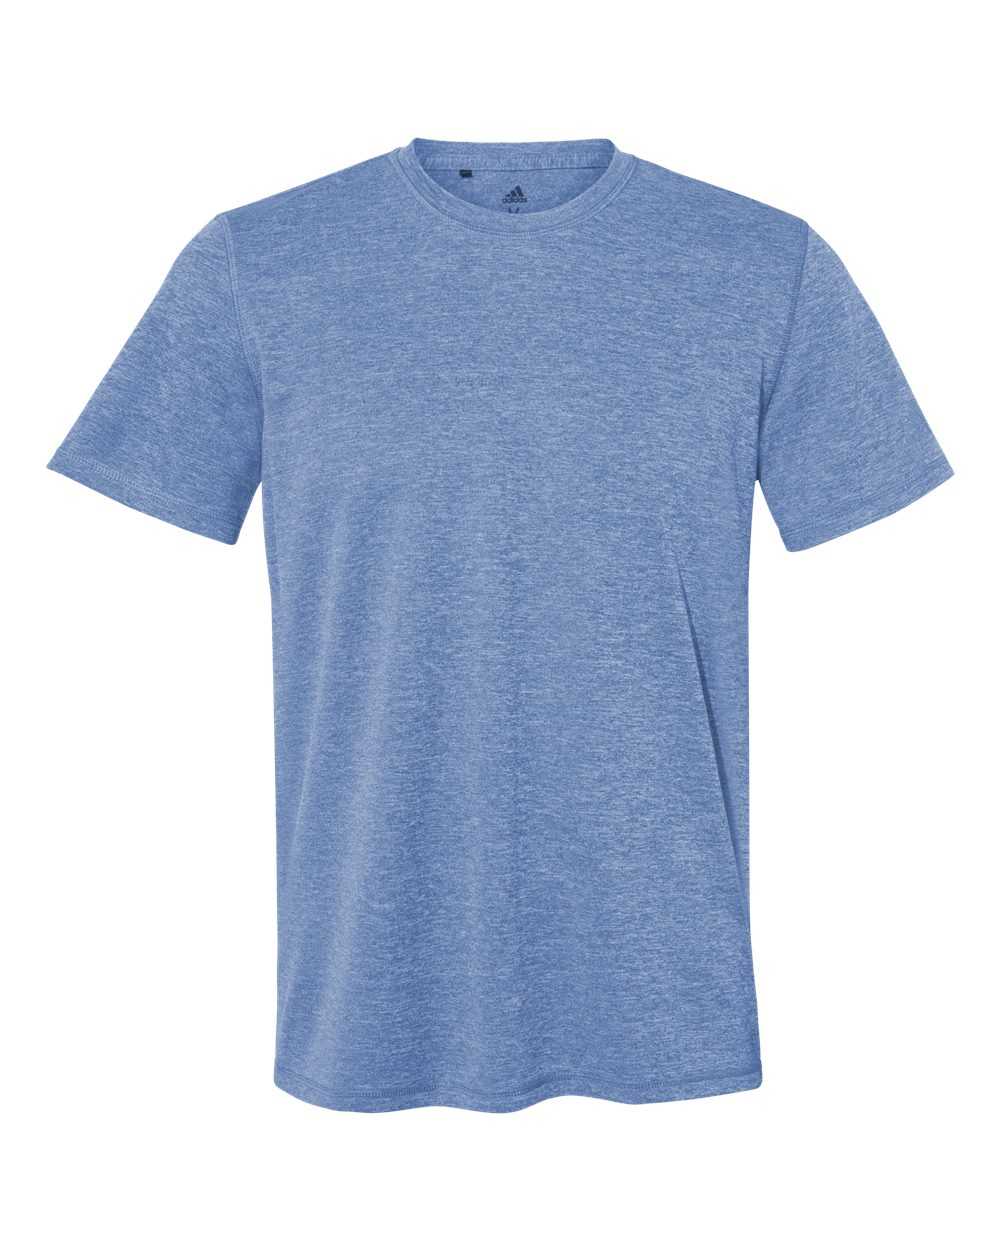 Adidas A376 Sport T-Shirt - Collegiate Royal Heather - HIT a Double